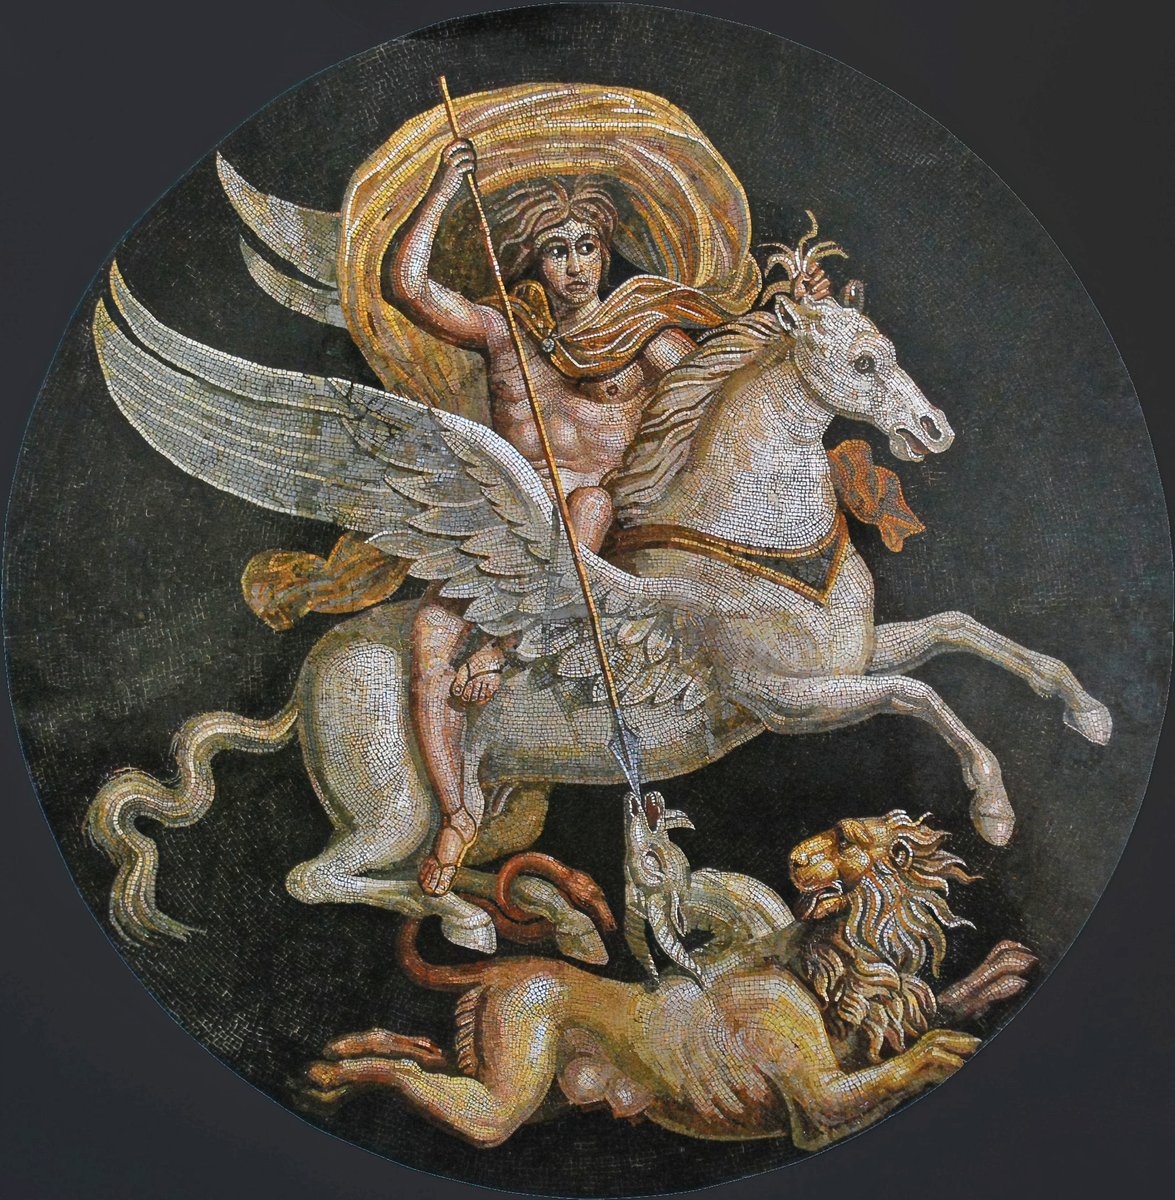 Incredible Roman mosaic showing Bellerophon riding Pegasus and killing the Chimera. The circular emblema mosaic adorned the reception hall of an aristocratic home in Autun (Roman Augustodunum). The composition was later used in the iconography of Saint George slaying the dragon.